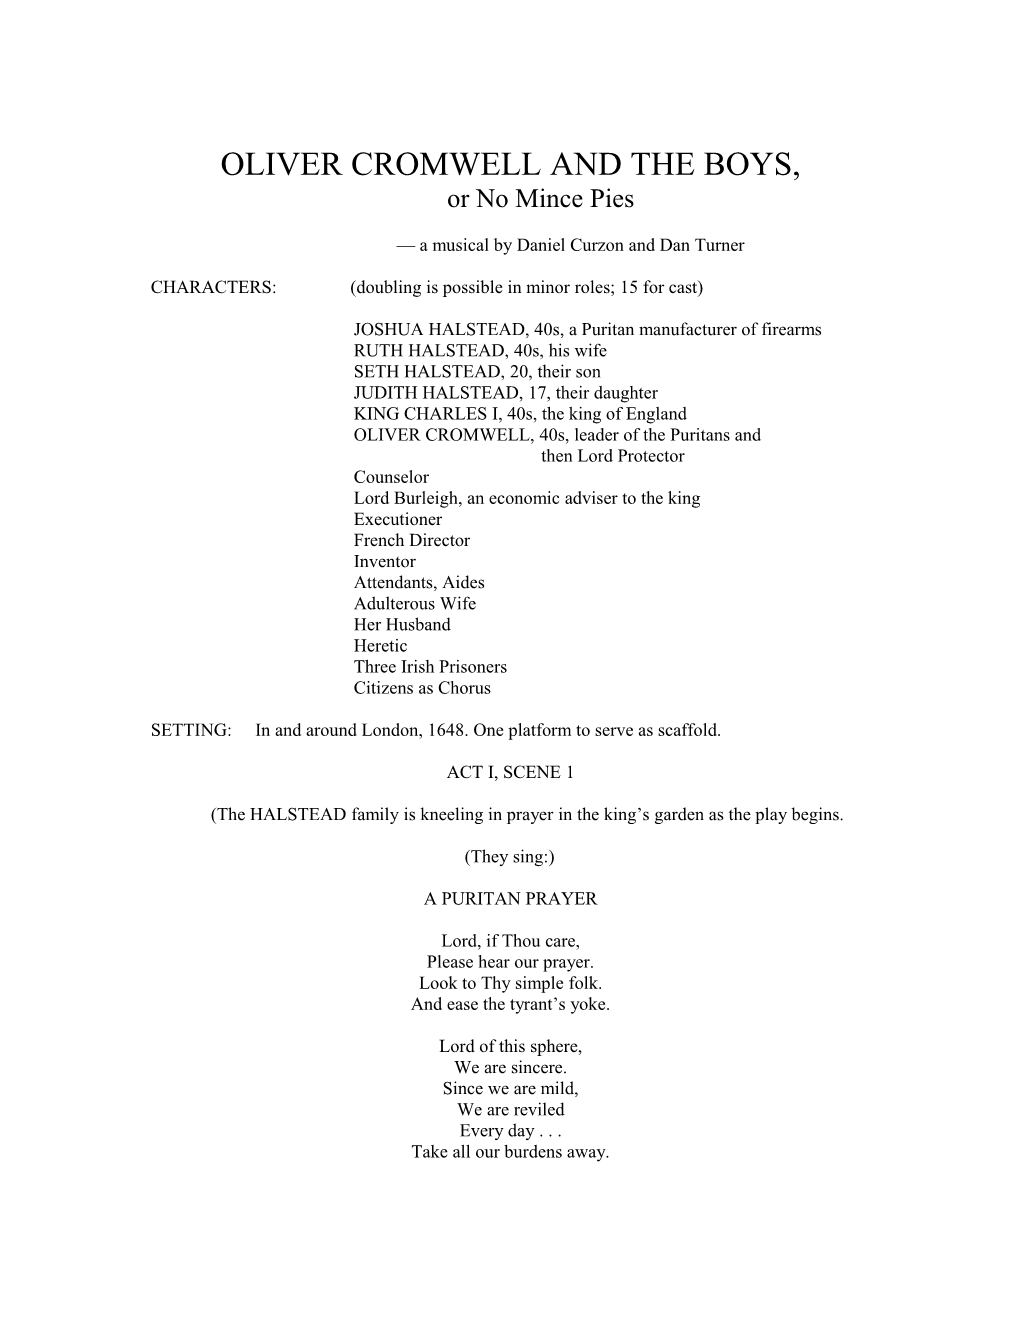 OLIVER CROMWELL and the BOYS (A Musical)